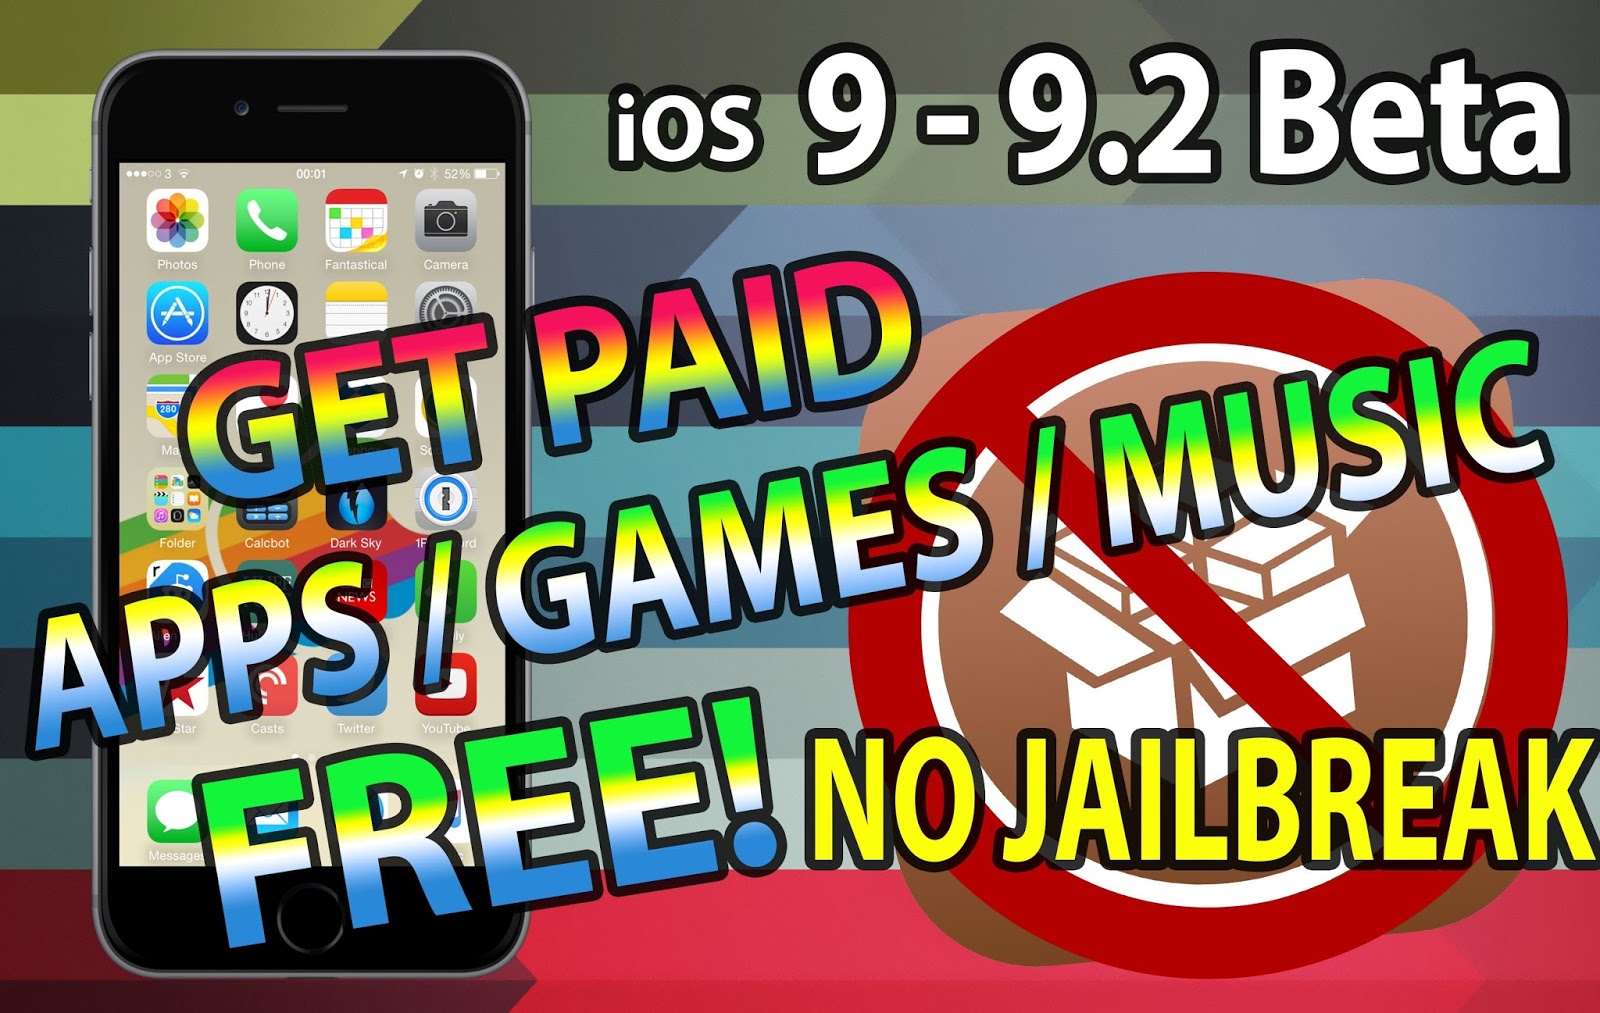 Download free apps without jailbreak